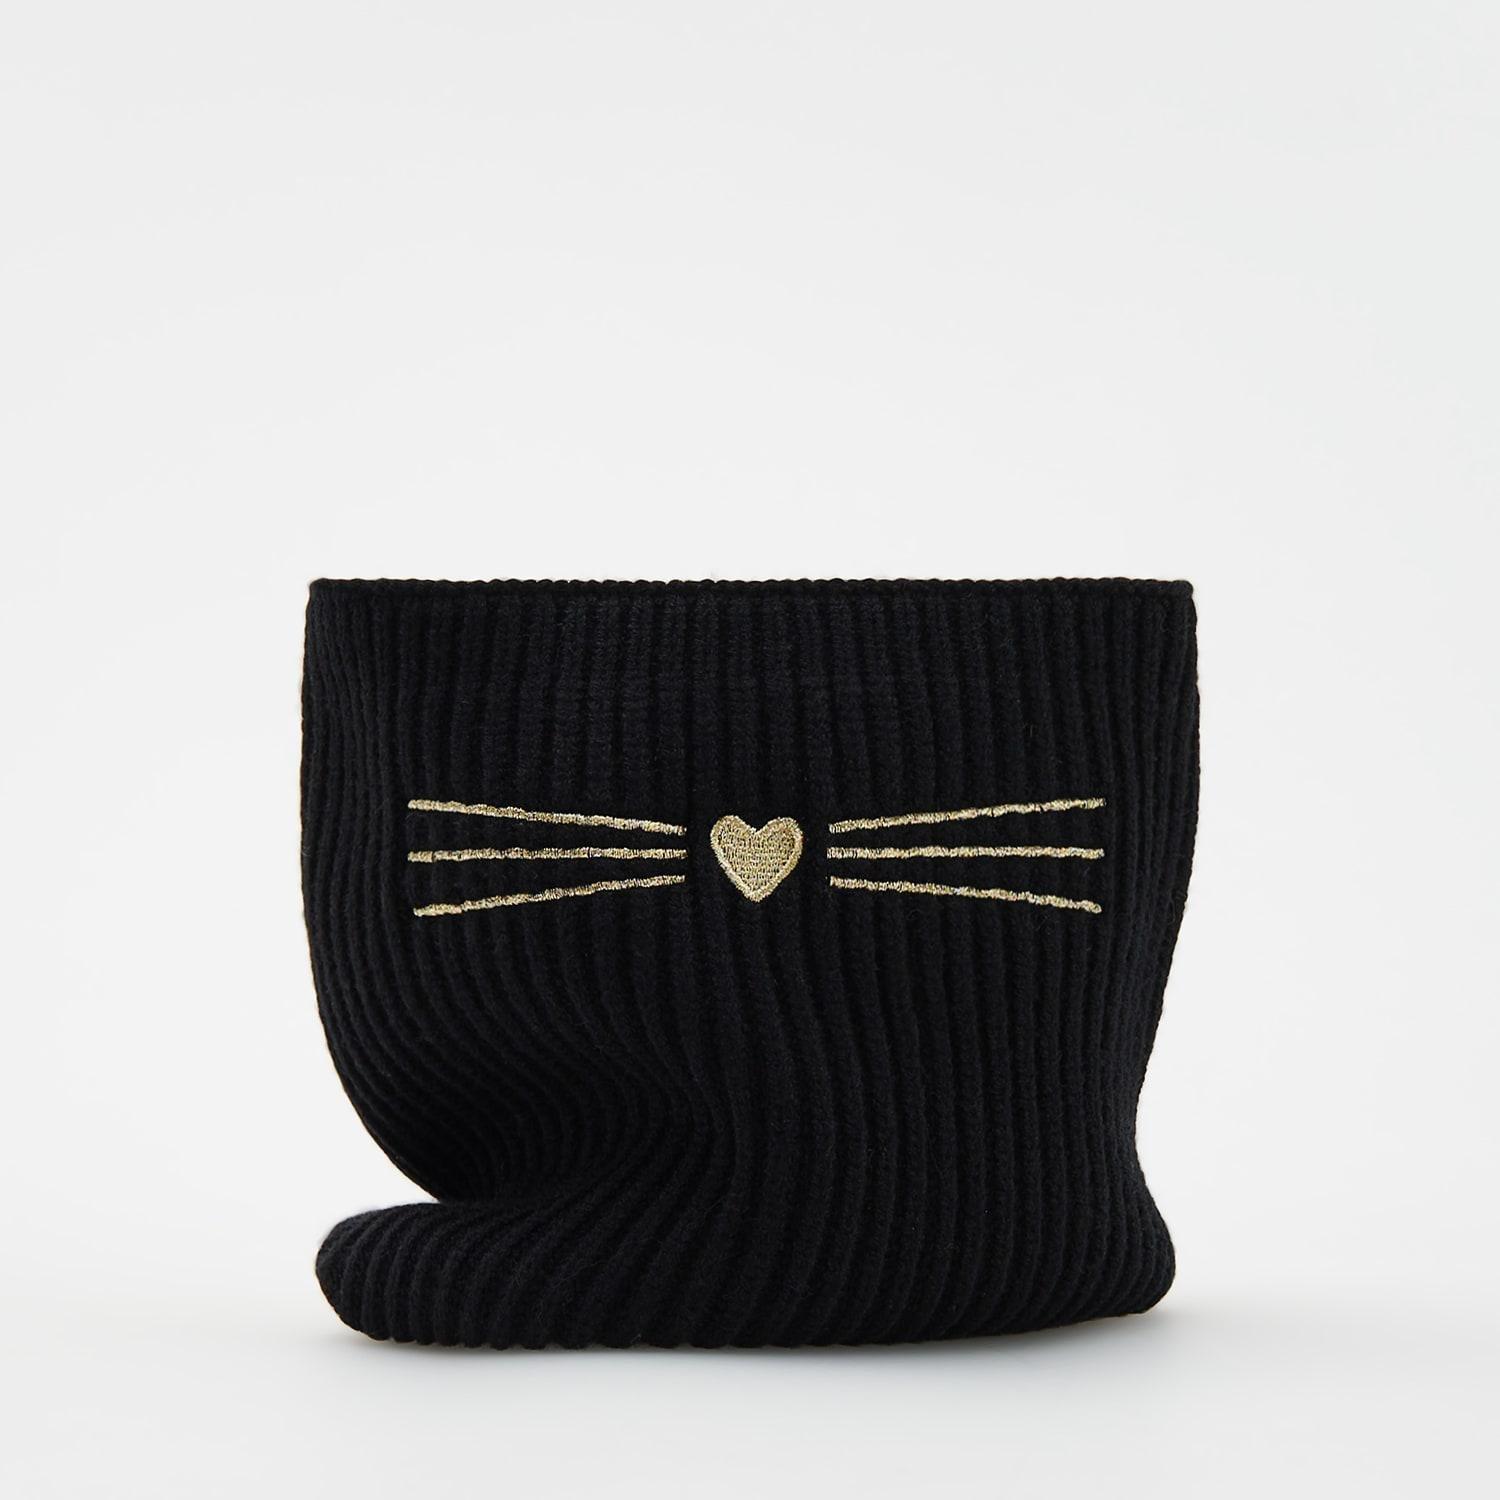 Reserved - Black Snood With Embroidery Details